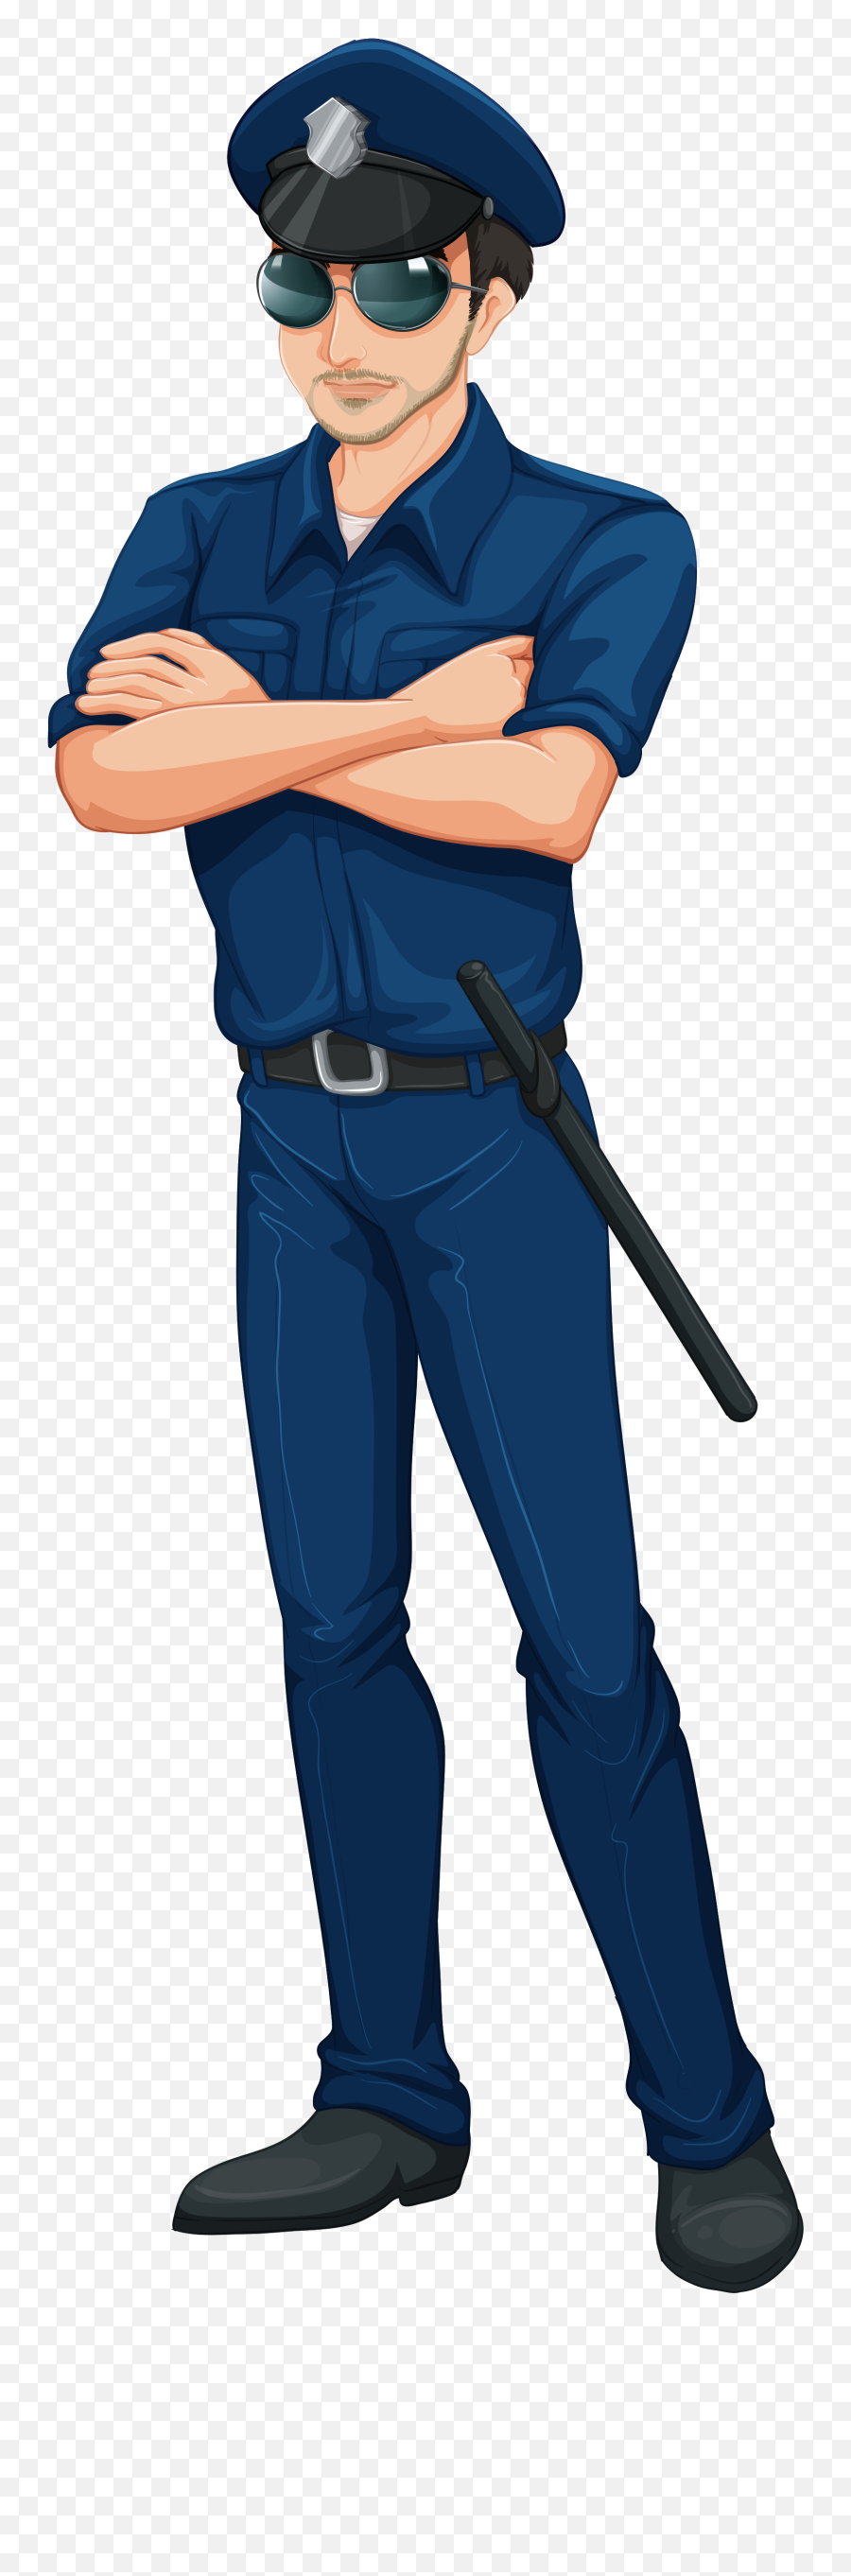 Hd Png Transparent Police - Police Png Clipart,Police Png